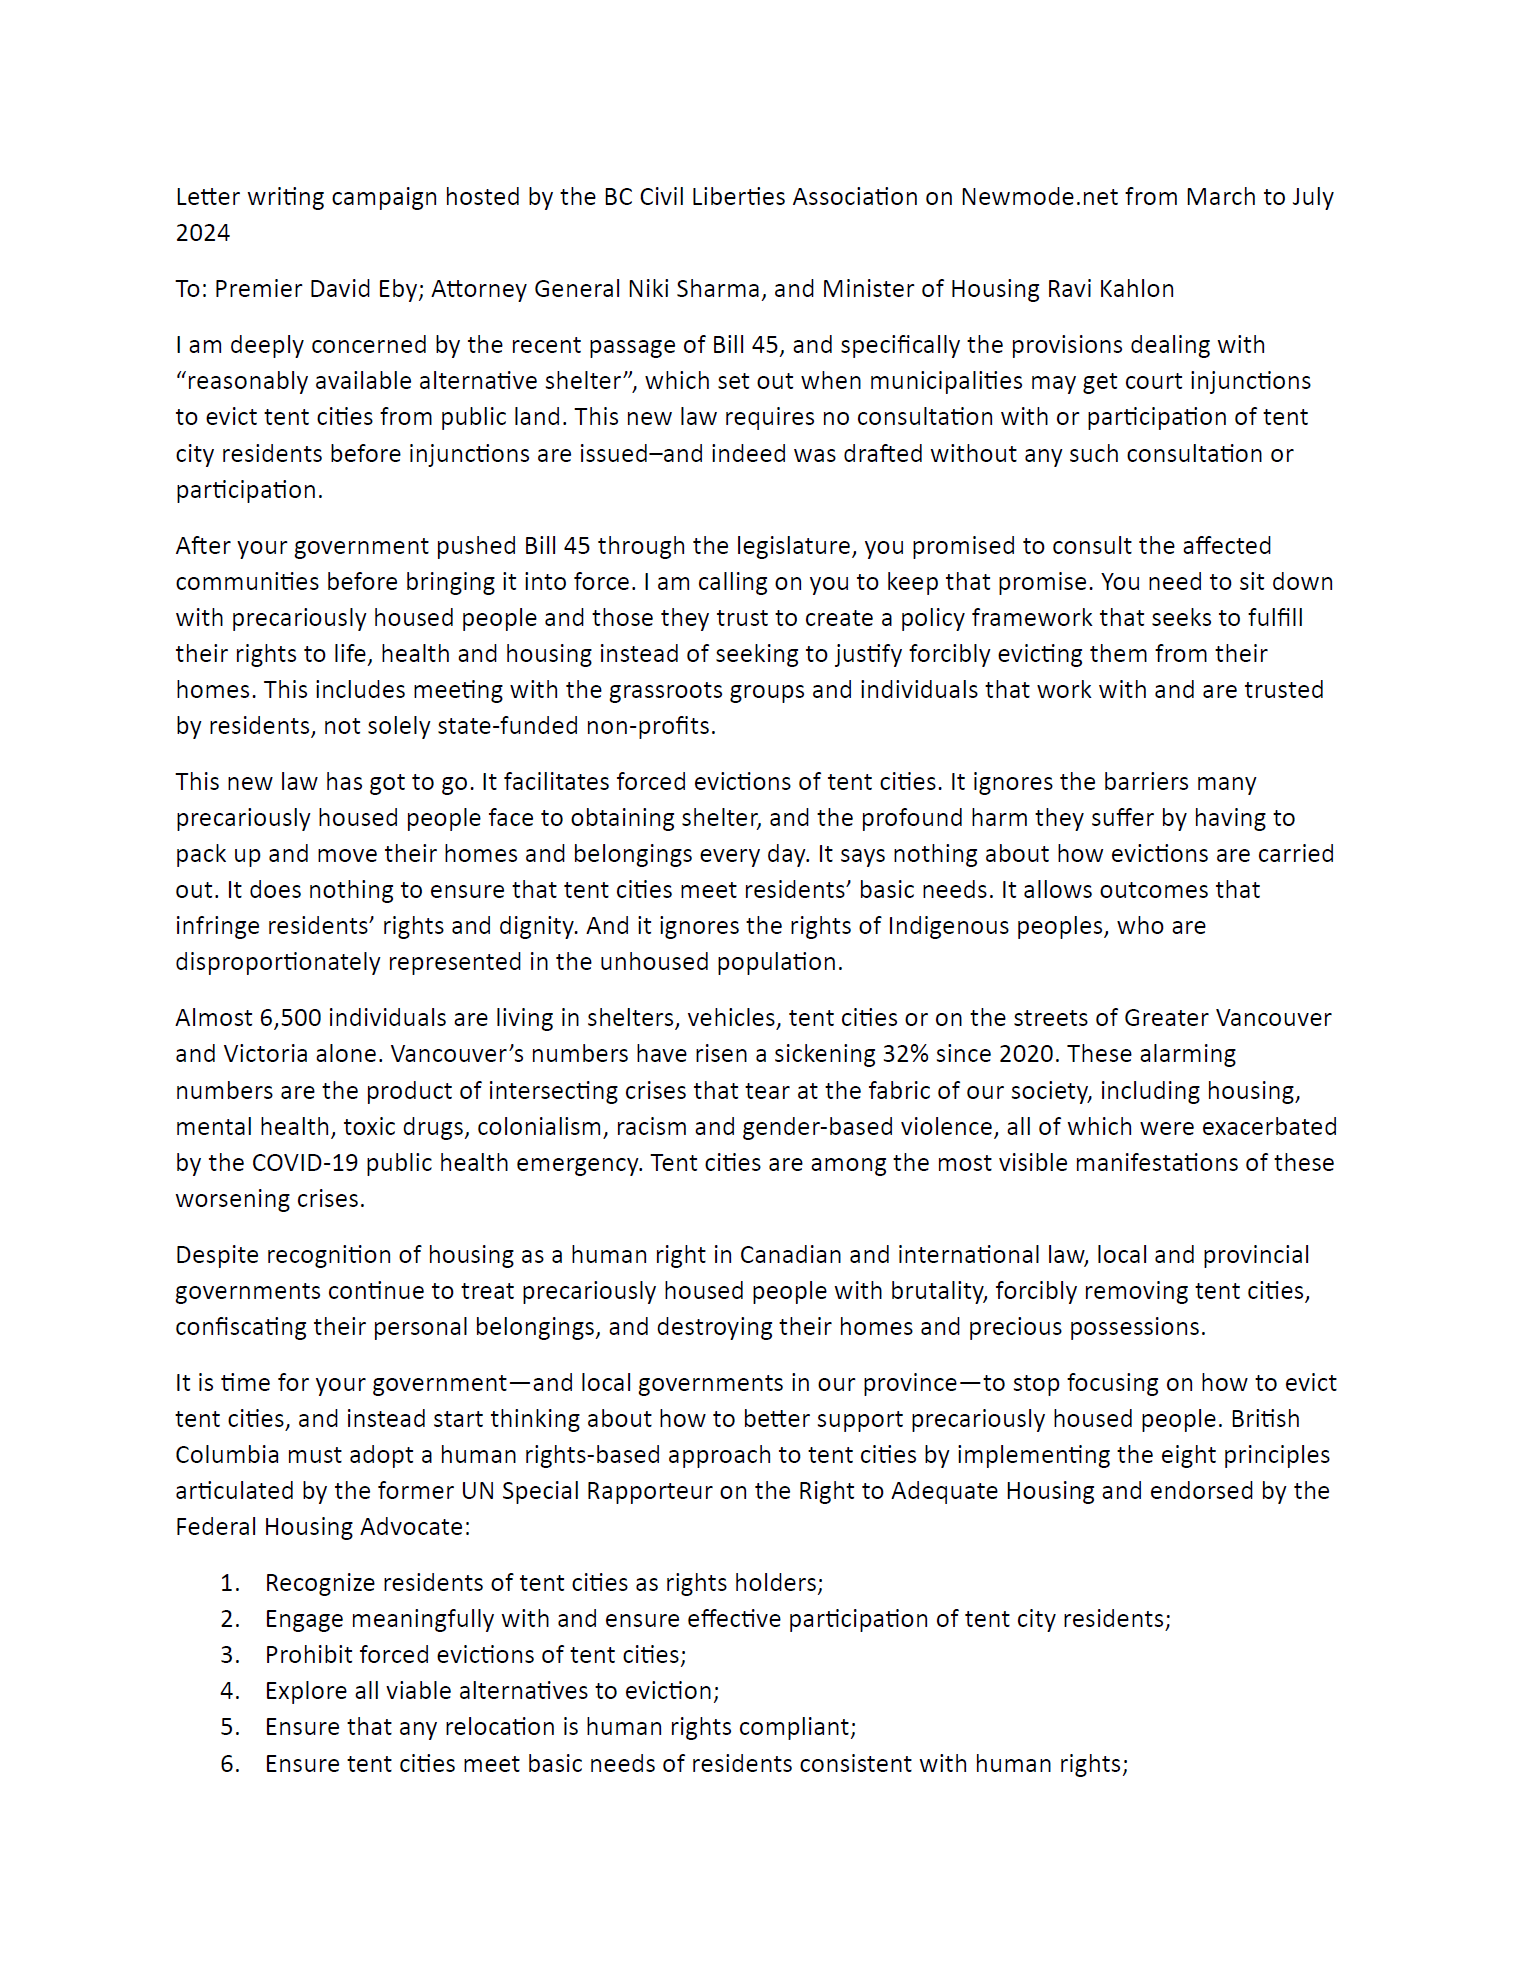 First page of open letter urging BC government to repeal Bill 45 "alternative shelter" provisions